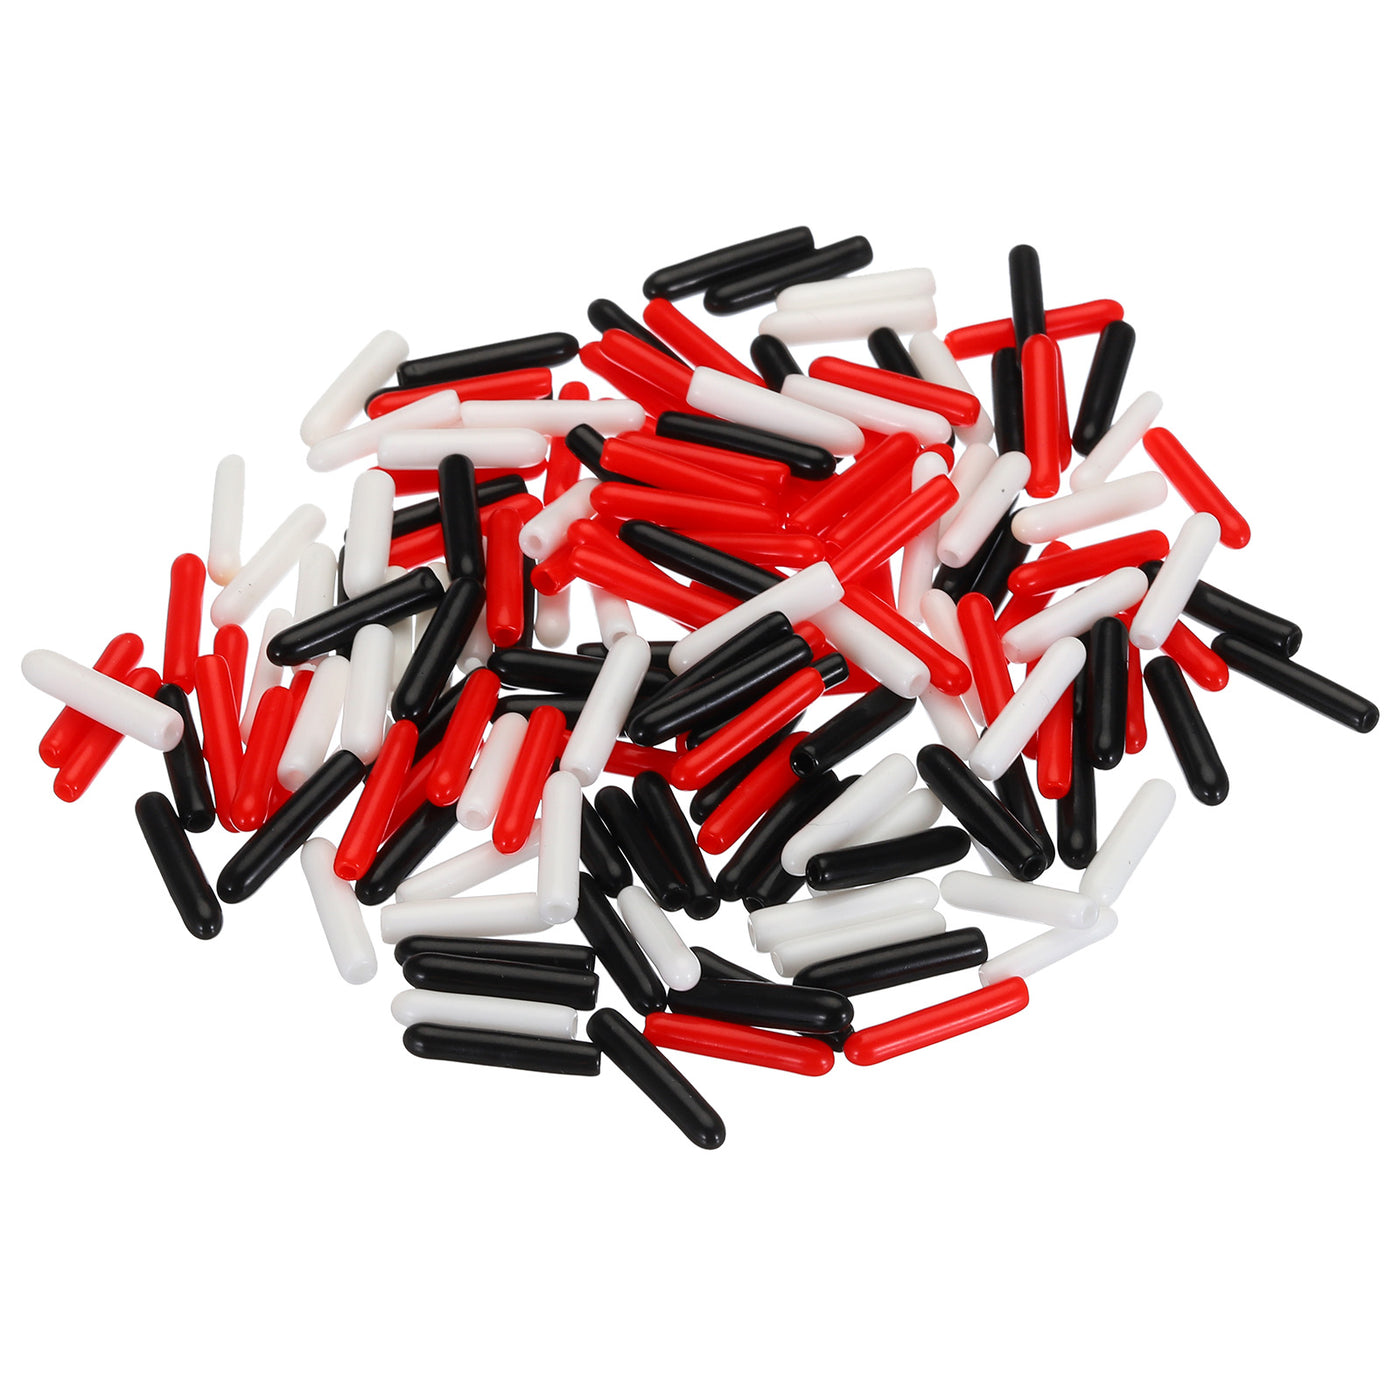 uxcell Uxcell 150pcs Rubber End Caps 1.5mm ID Vinyl Round Tube Bolt Cap Cover Screw Thread Protectors Black, Red, White